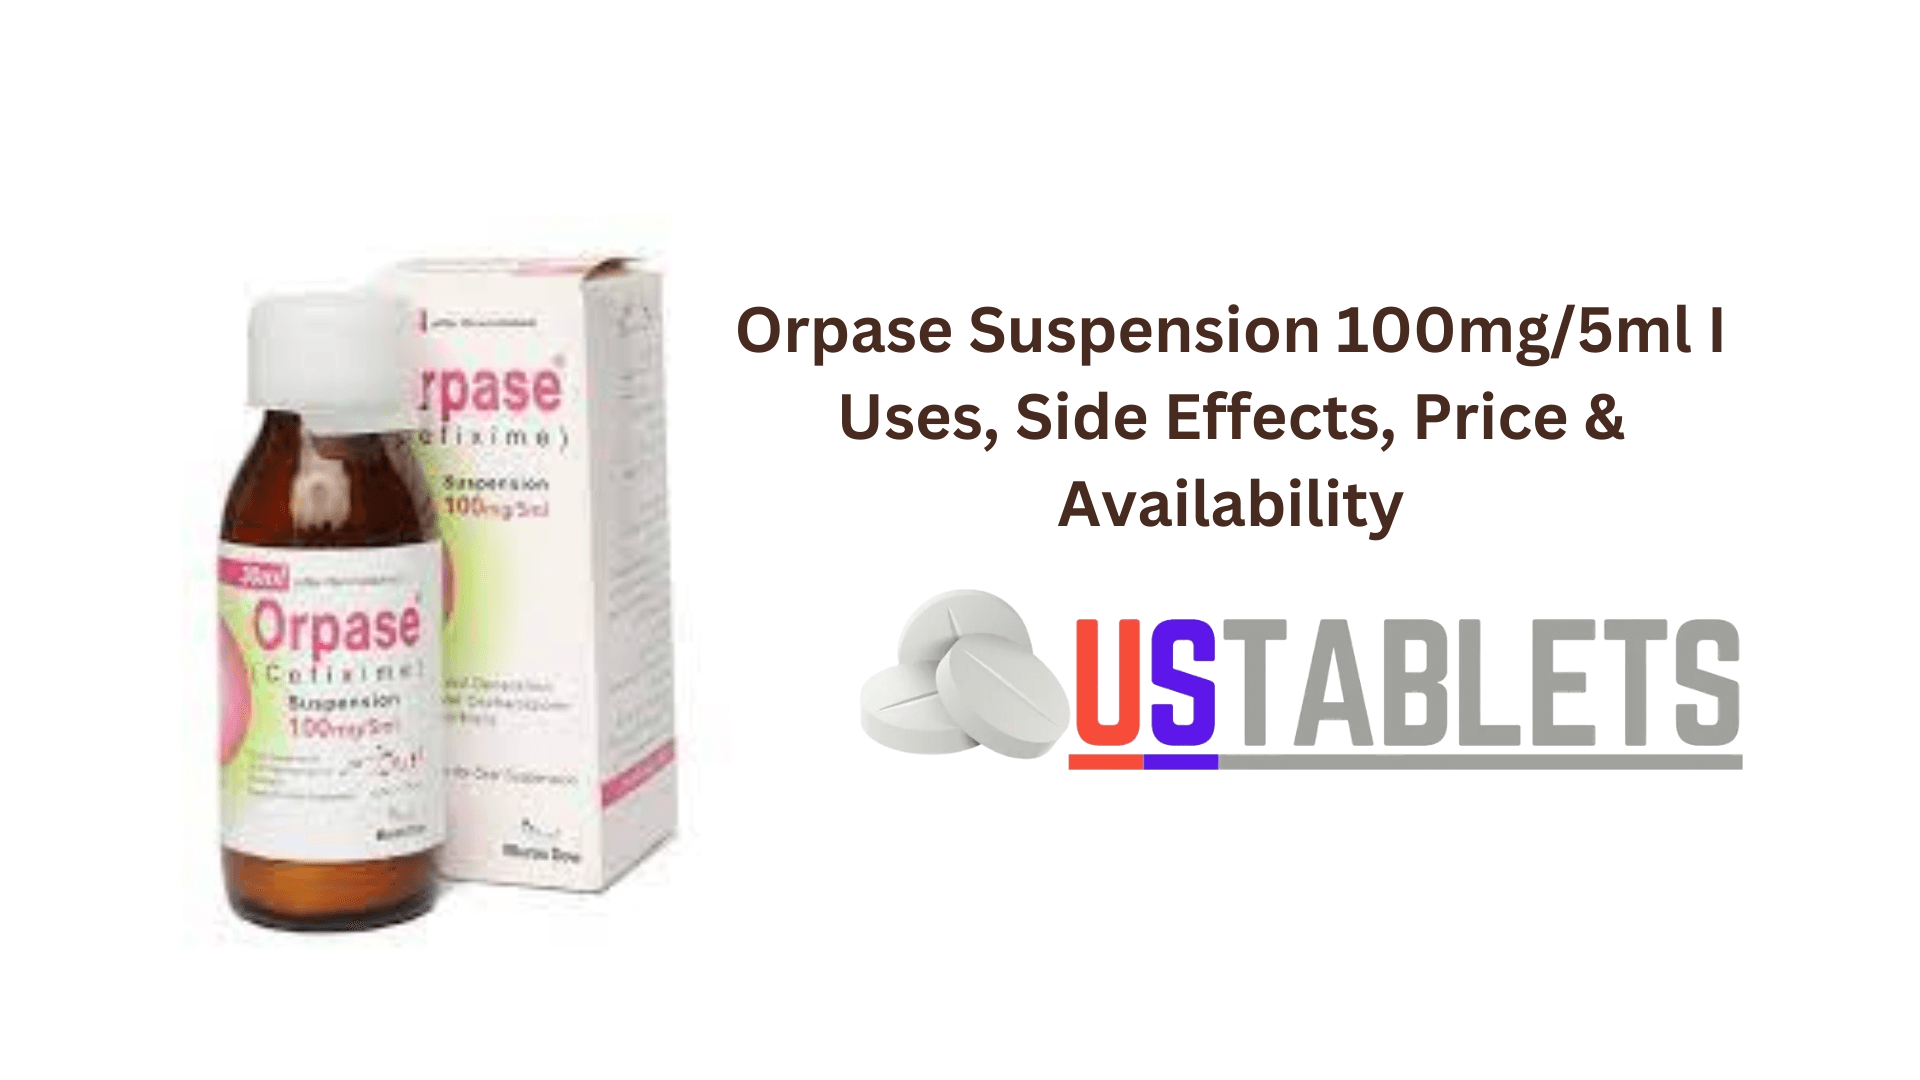 Orpase Suspension 100mg/5ml I Uses, Side Effects, Price & Availability